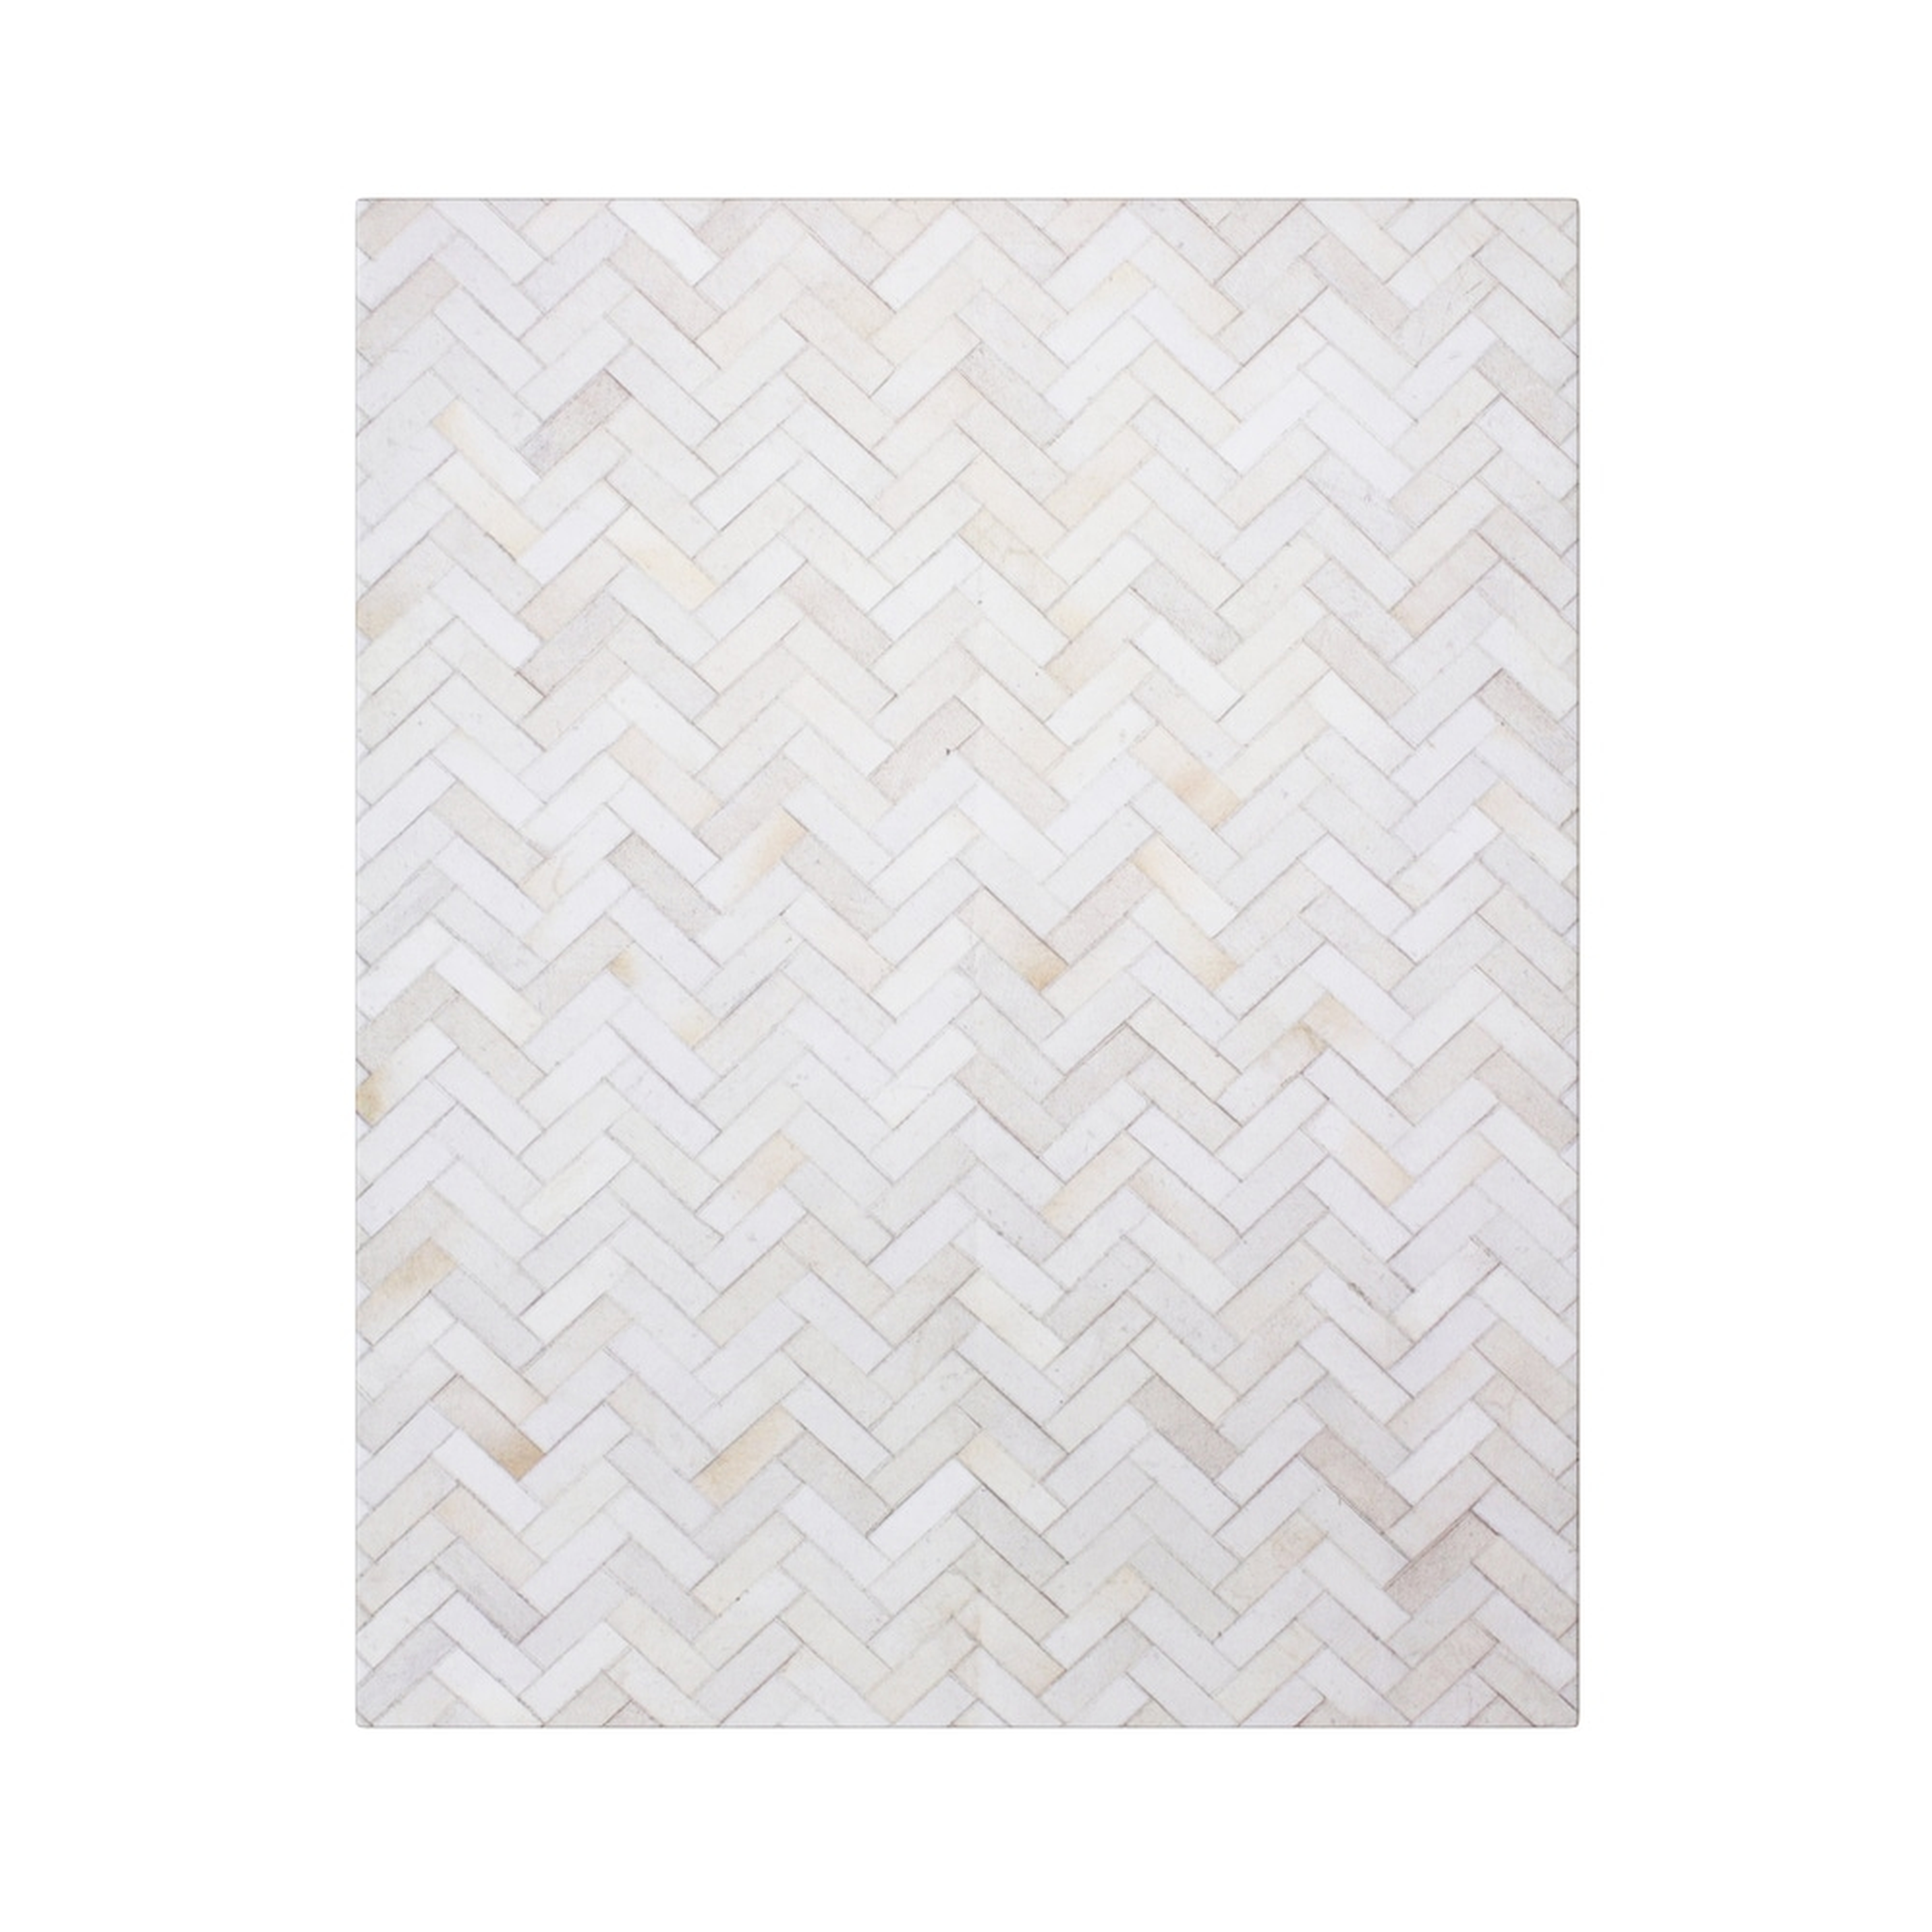 Strick & Bolton Manet Hand-stitched Chevron Cow Hide Leather White Rug - 9' x 12' - Overstock